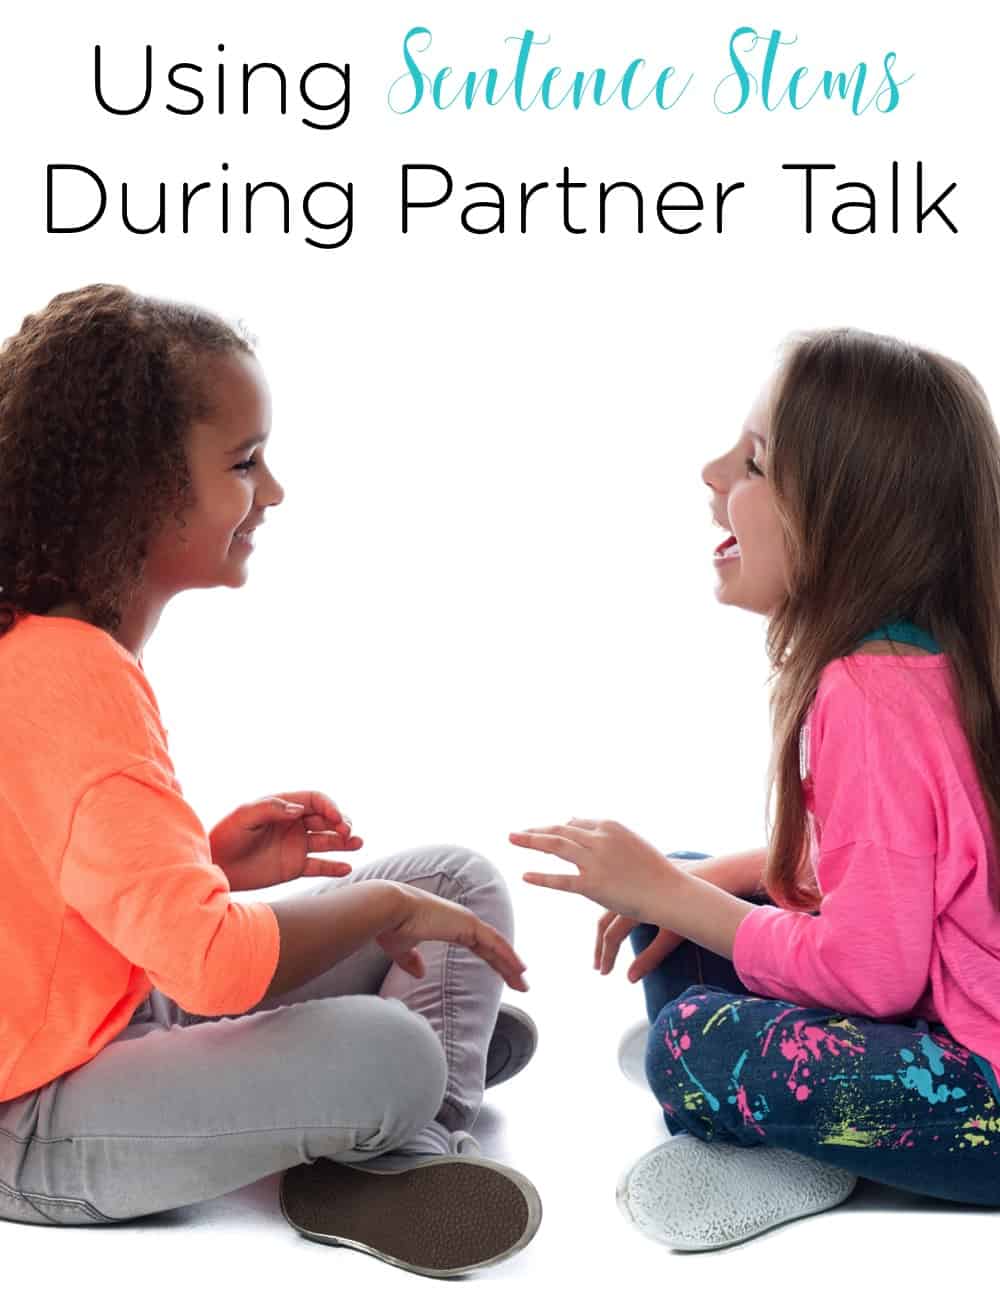 Partner talk is an important piece of helping students solidify their learning and practice academic vocabulary. Using sentence stems helps support students in this in various ways. I love the tips this teacher shares!